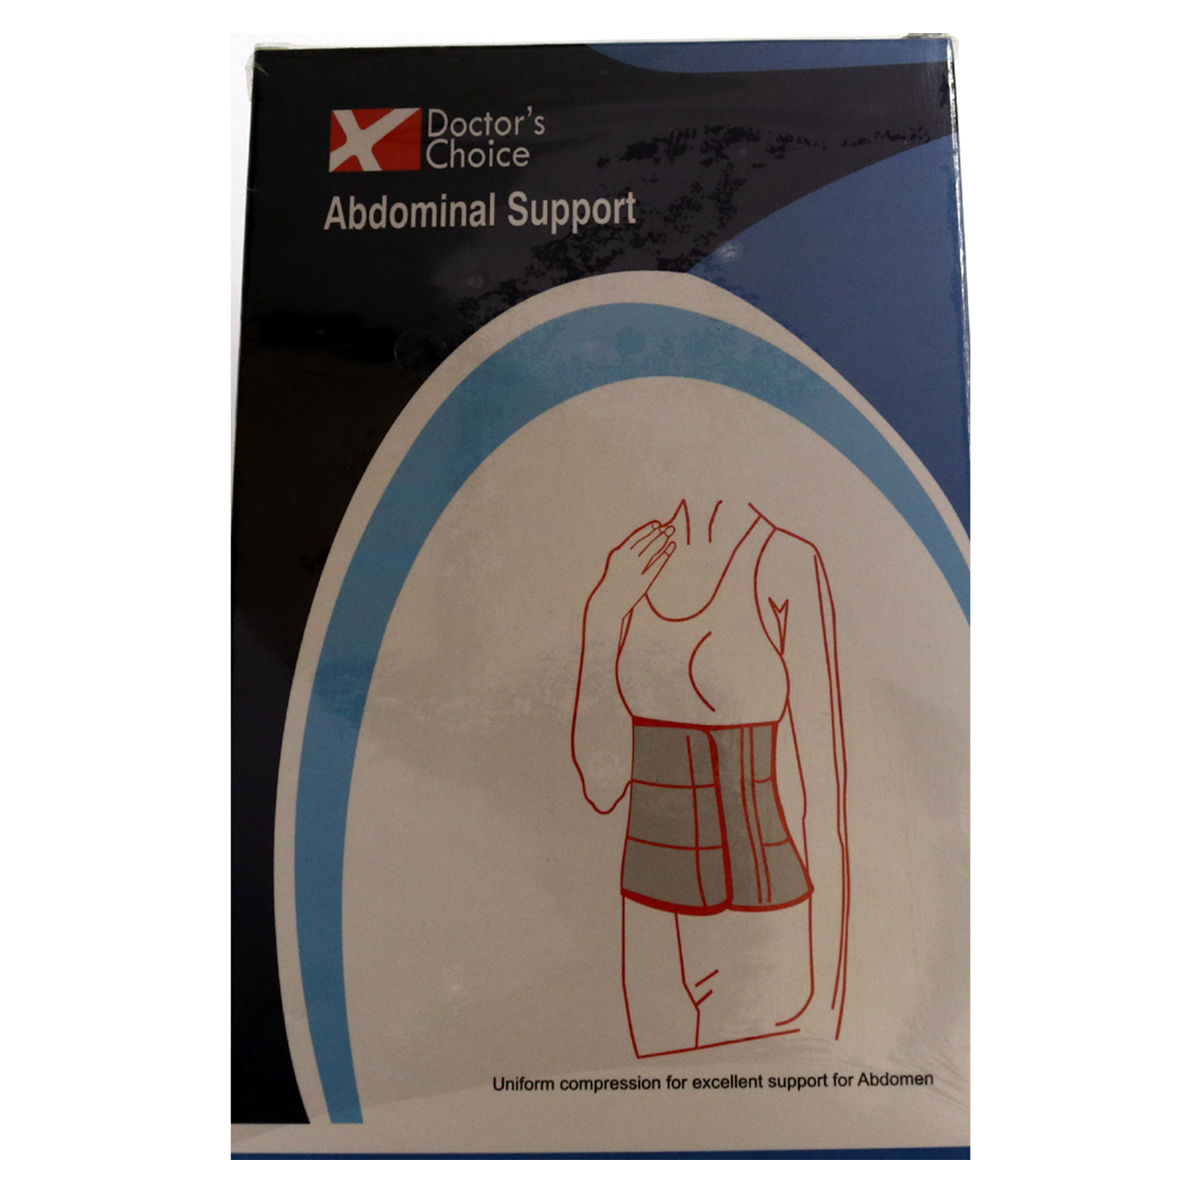 Doctor's Choice Abdominal Support Large, 1 Count Price, Uses, Side Effects,  Composition - Apollo Pharmacy